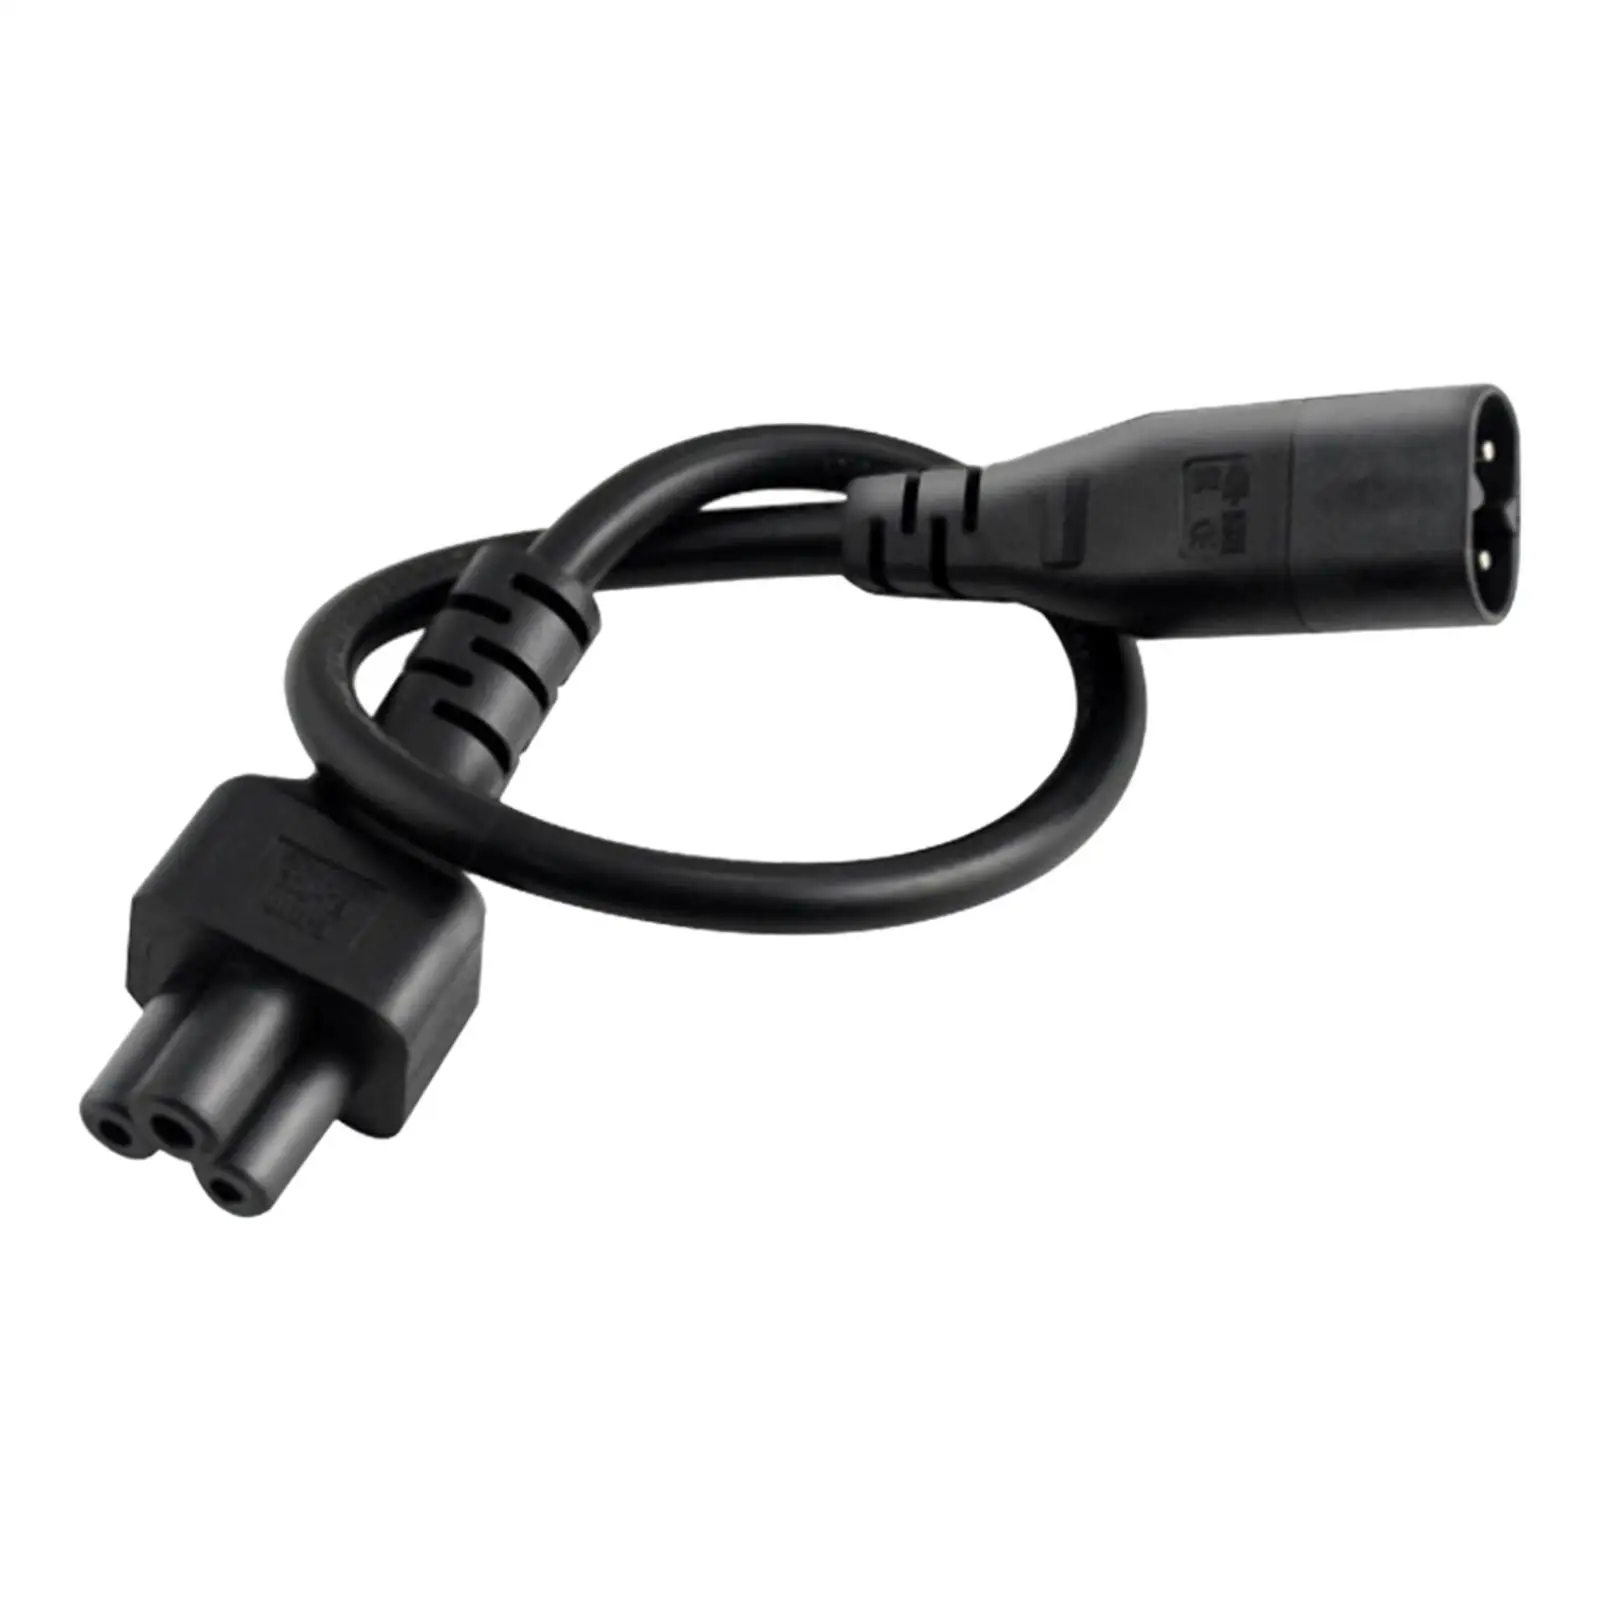 Flexible IEC320-C8 to IEC320-Power Adapter Cable 2 Pin to 3 Pin Extension Cord for